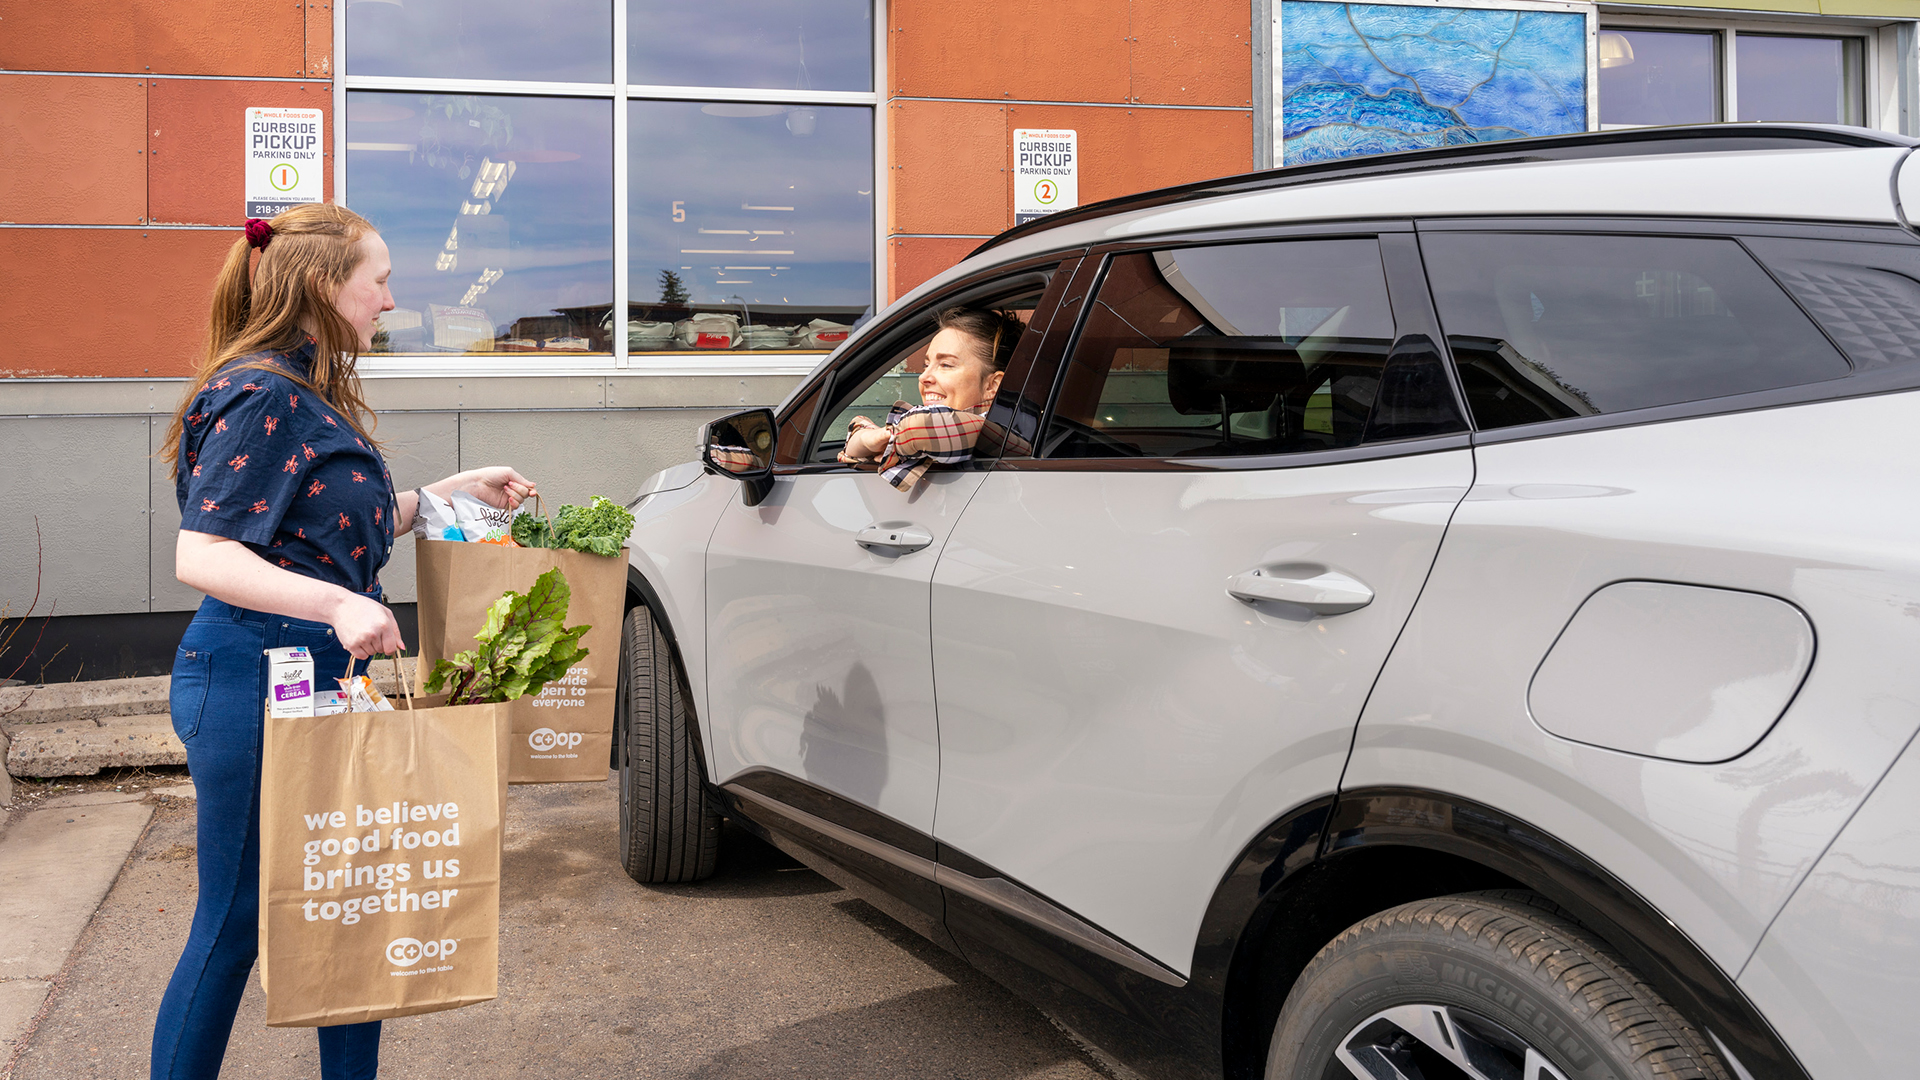 A woman at a curbside pickup location at Whole Foods Coop Duluth MN hands grocery bags to a woman in a parked car. The bags have fresh produce and a sign reading, "we believe good food brings us together." Store signs are visible in the background.